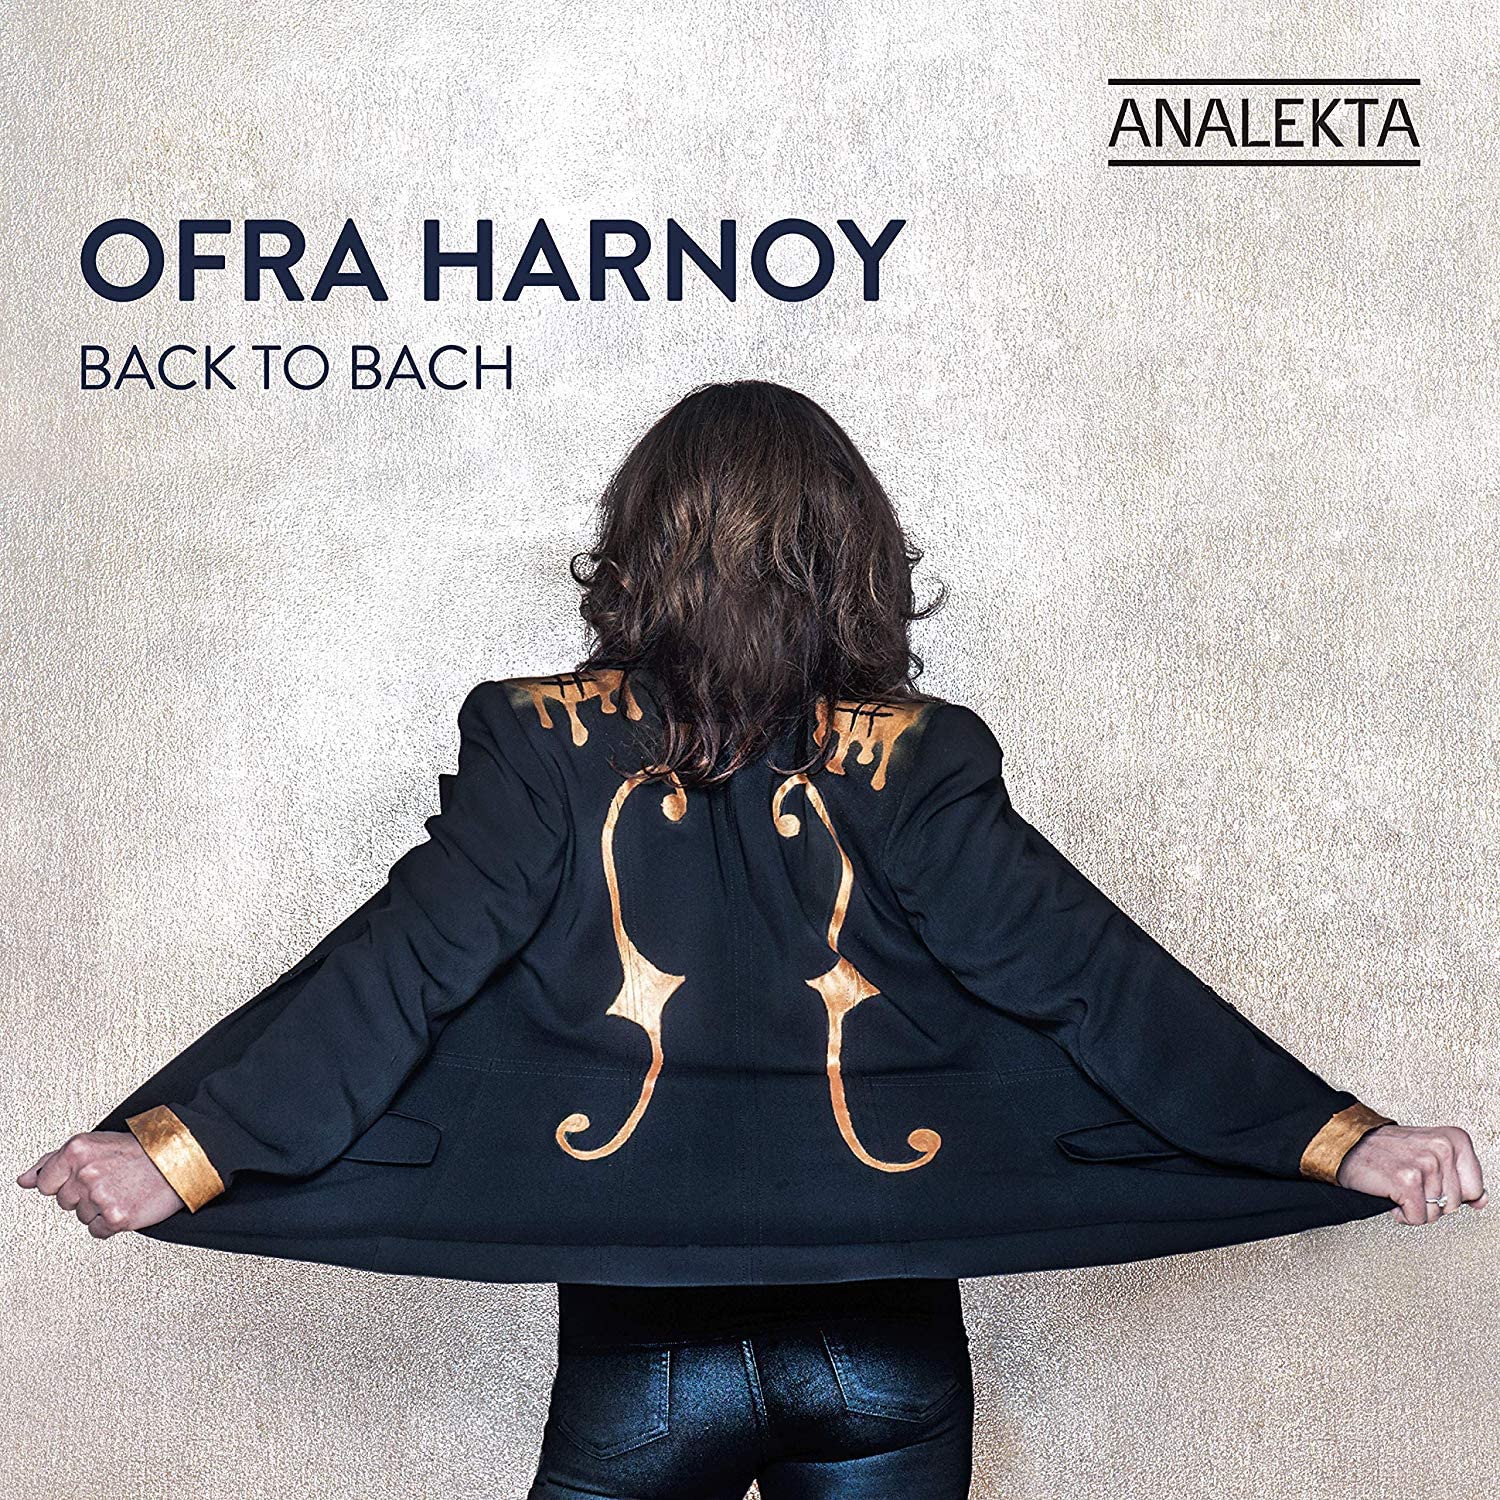 Back to Bach with Ofra Harnoy